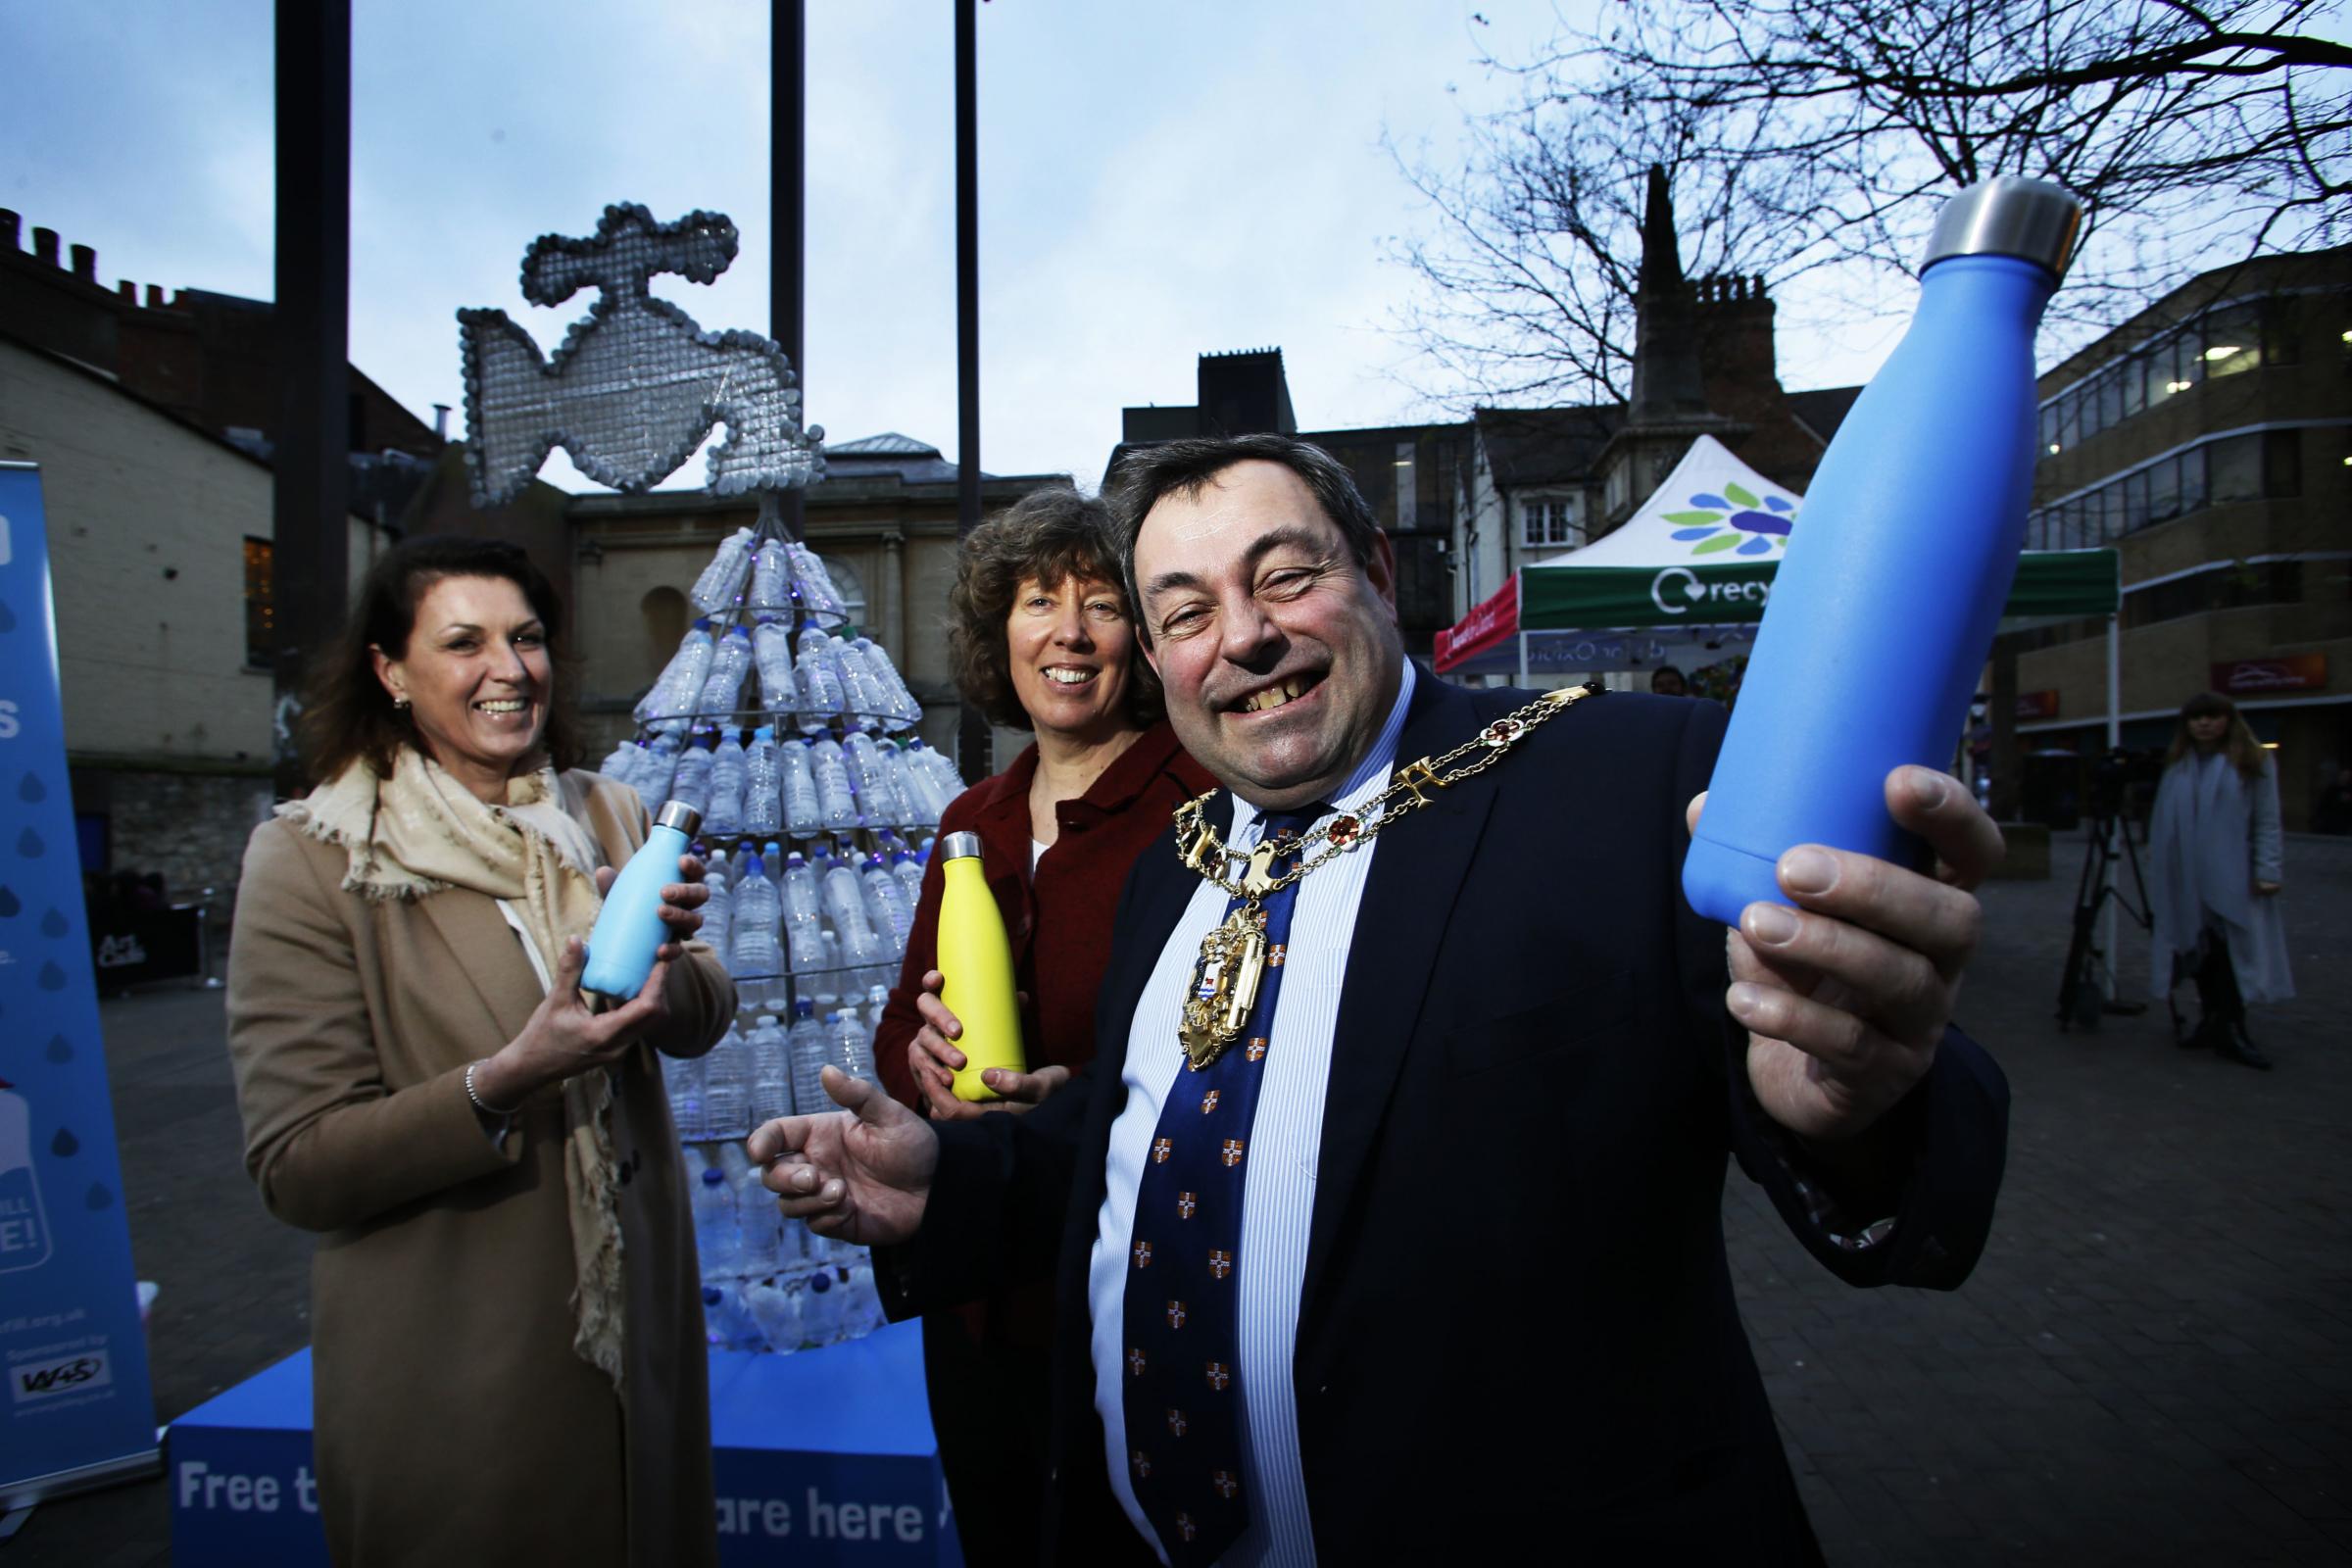 Lois Muddiman (centre), at the launch of the official Refill Oxford sculpture she created in 2019 at Bonn Square. Also pictured is her election rival and then-Lord Mayor Colin Cook. Picture: Ed Nix